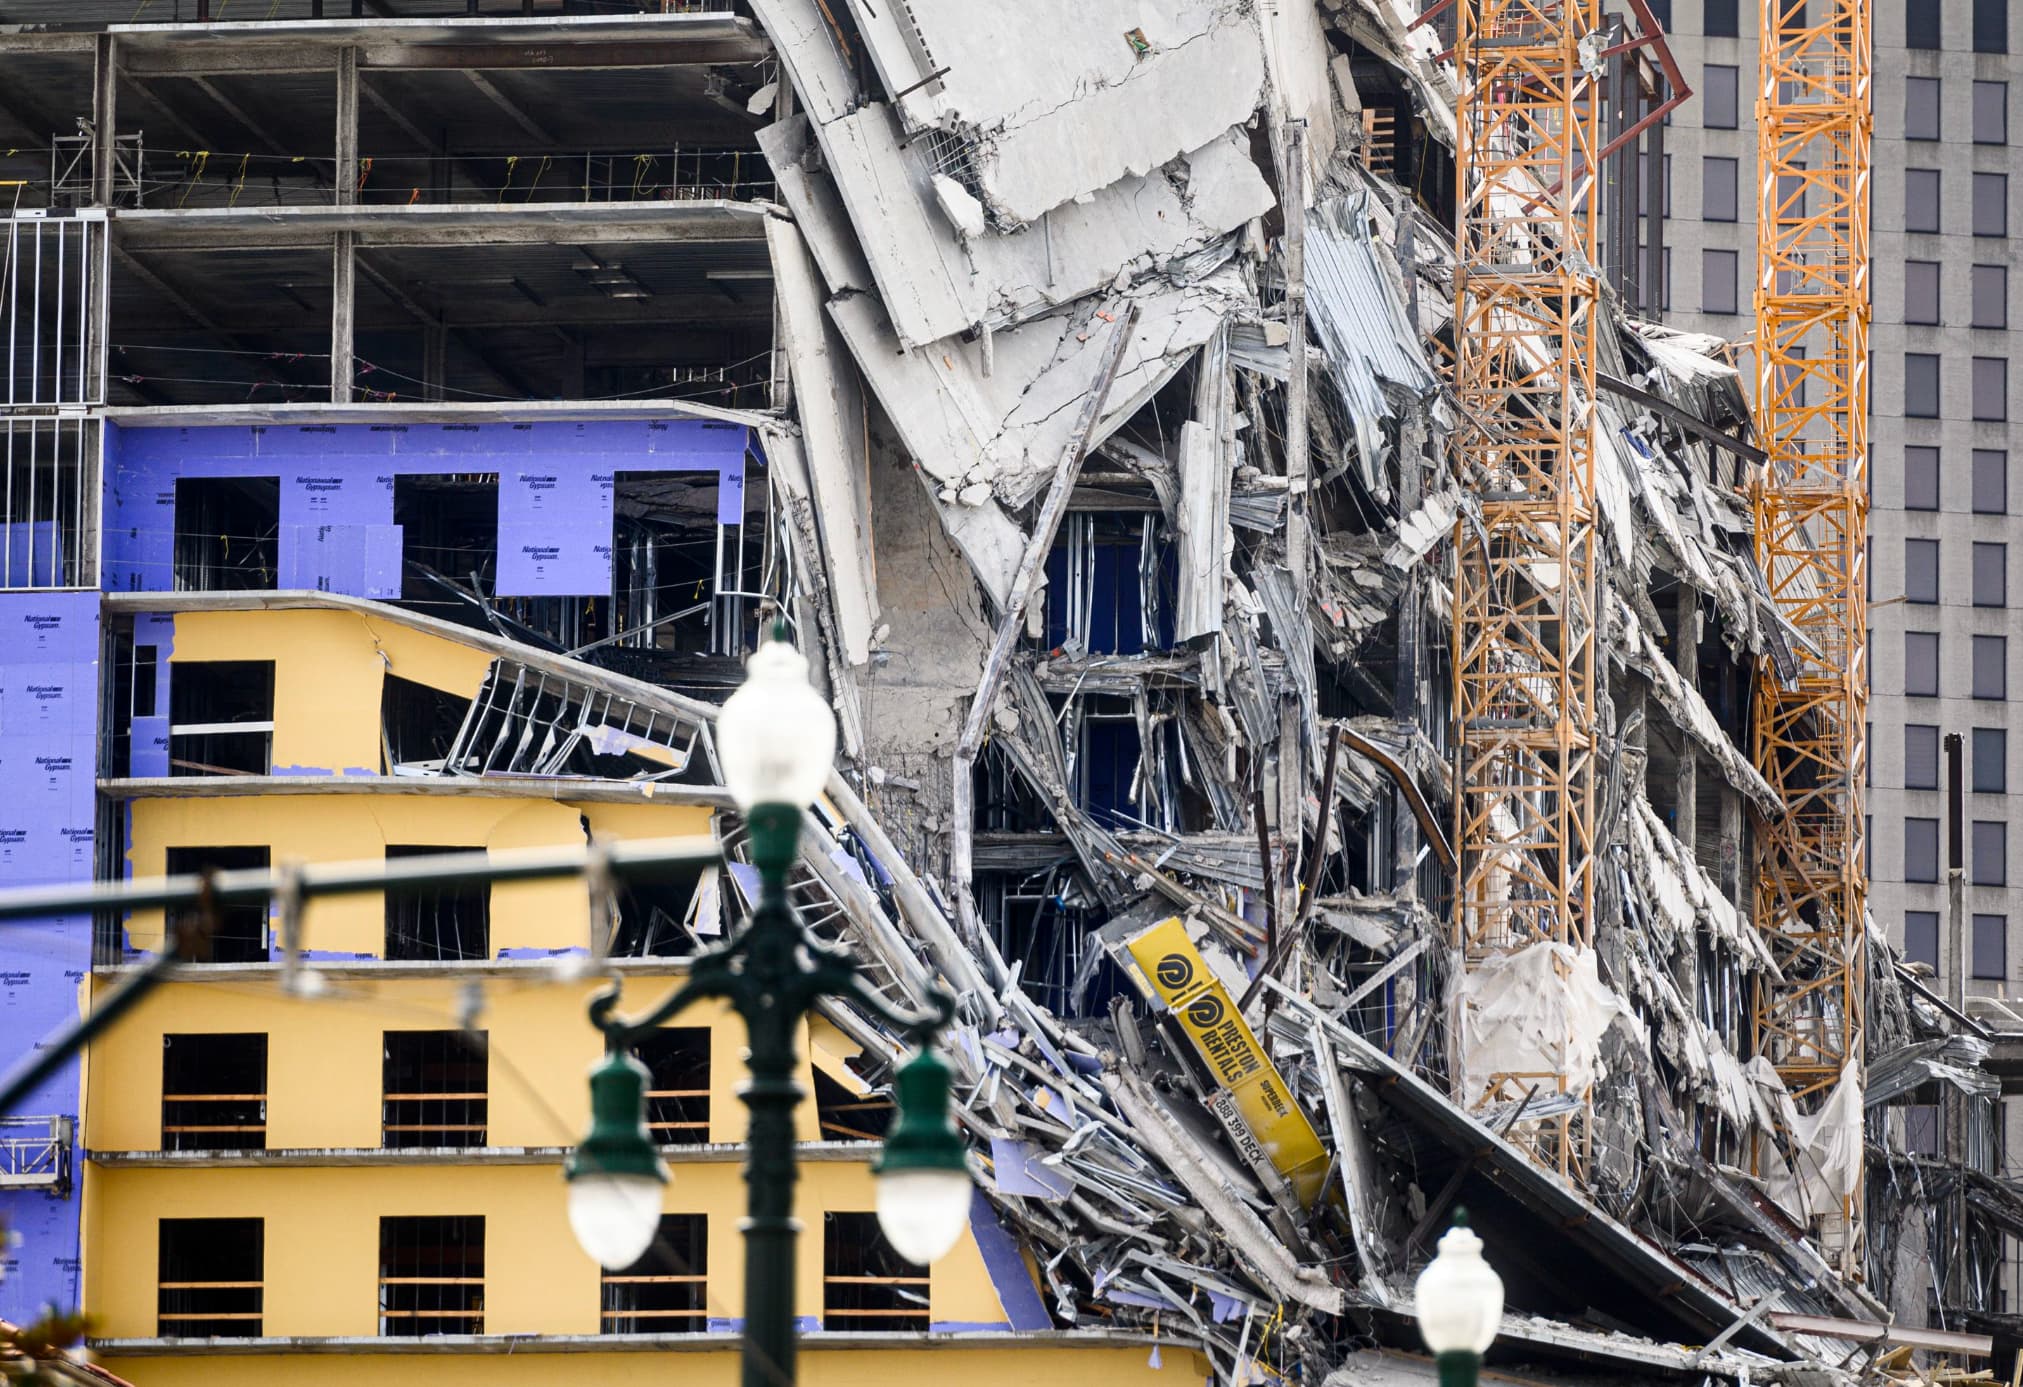 On October 12, 2019, three construction workers building a Hard Rock Hotel in New Orleans, Louisiana died after the structure collapsed due to a series of engineering failures. It took 10 months for two of the three bodies to be removed from the site. 